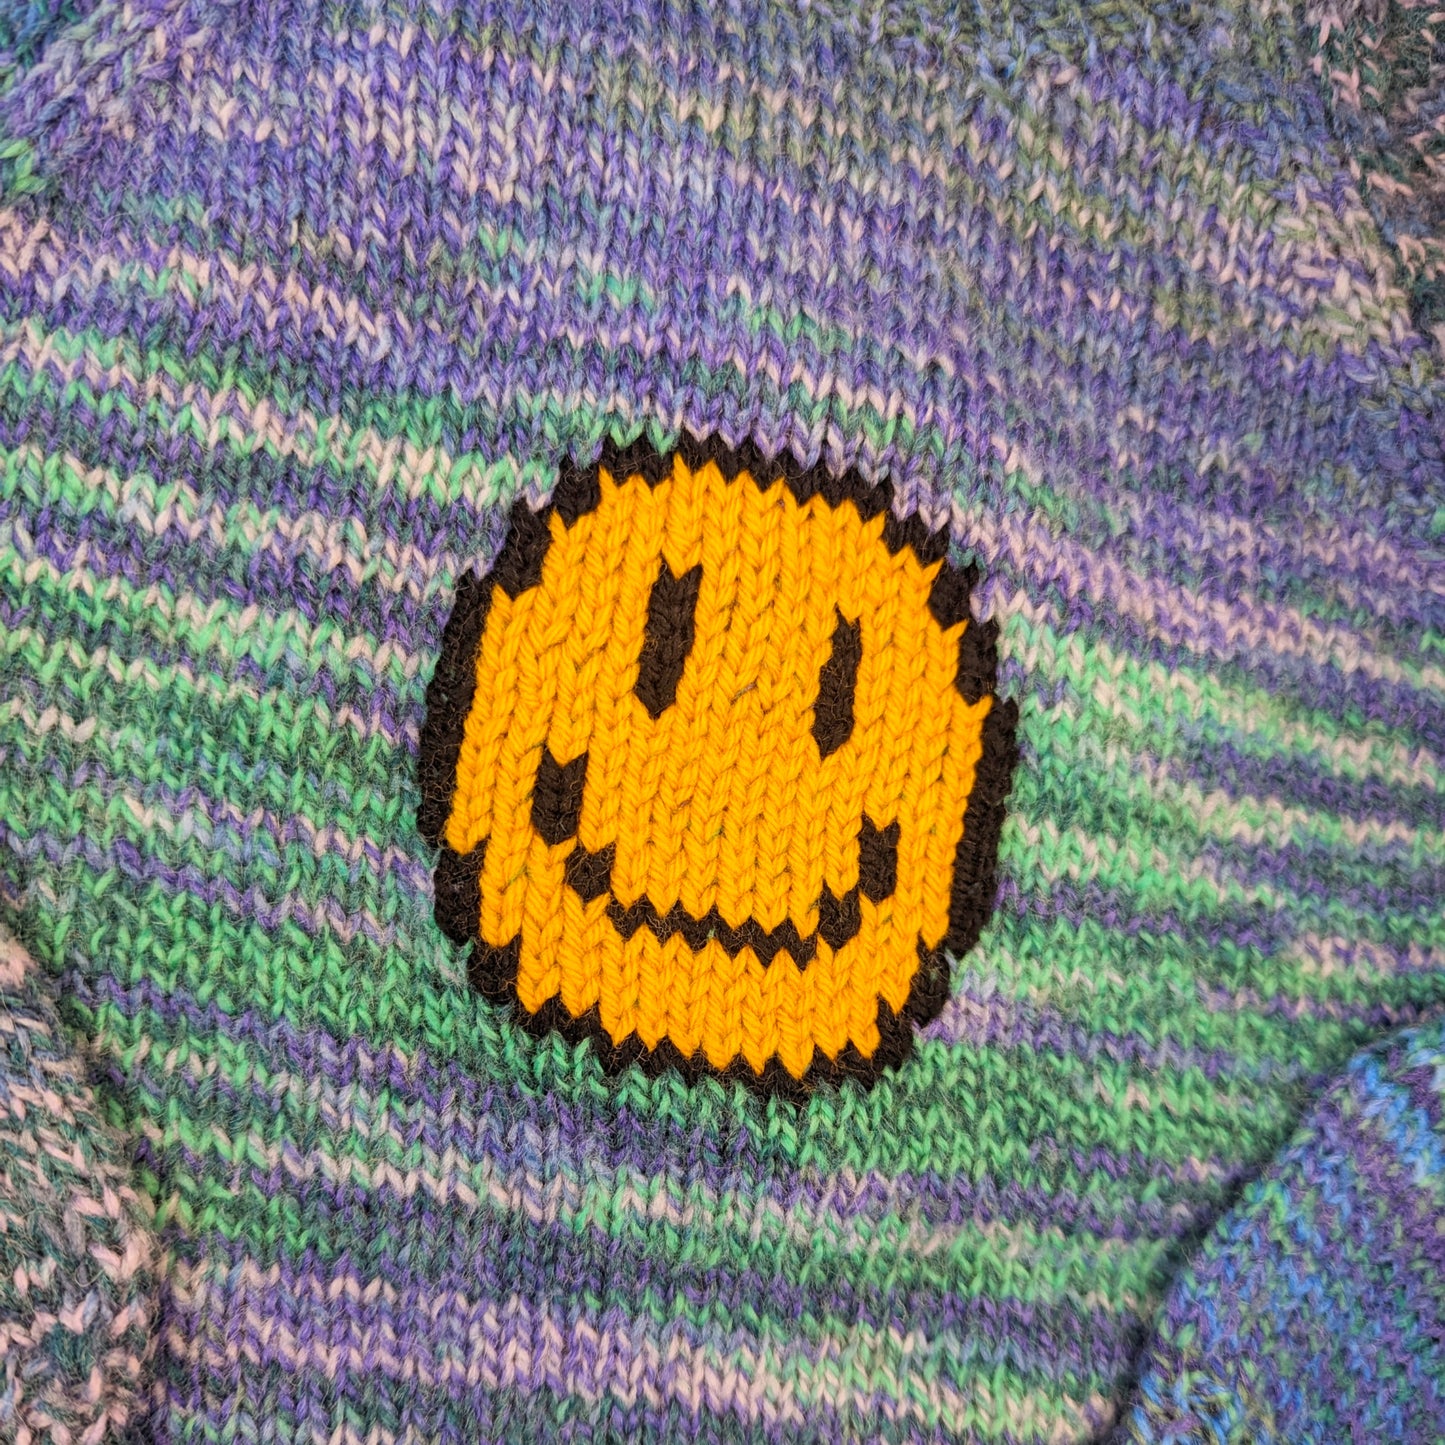 Blue Mix Smiley Jumper 2-3 years